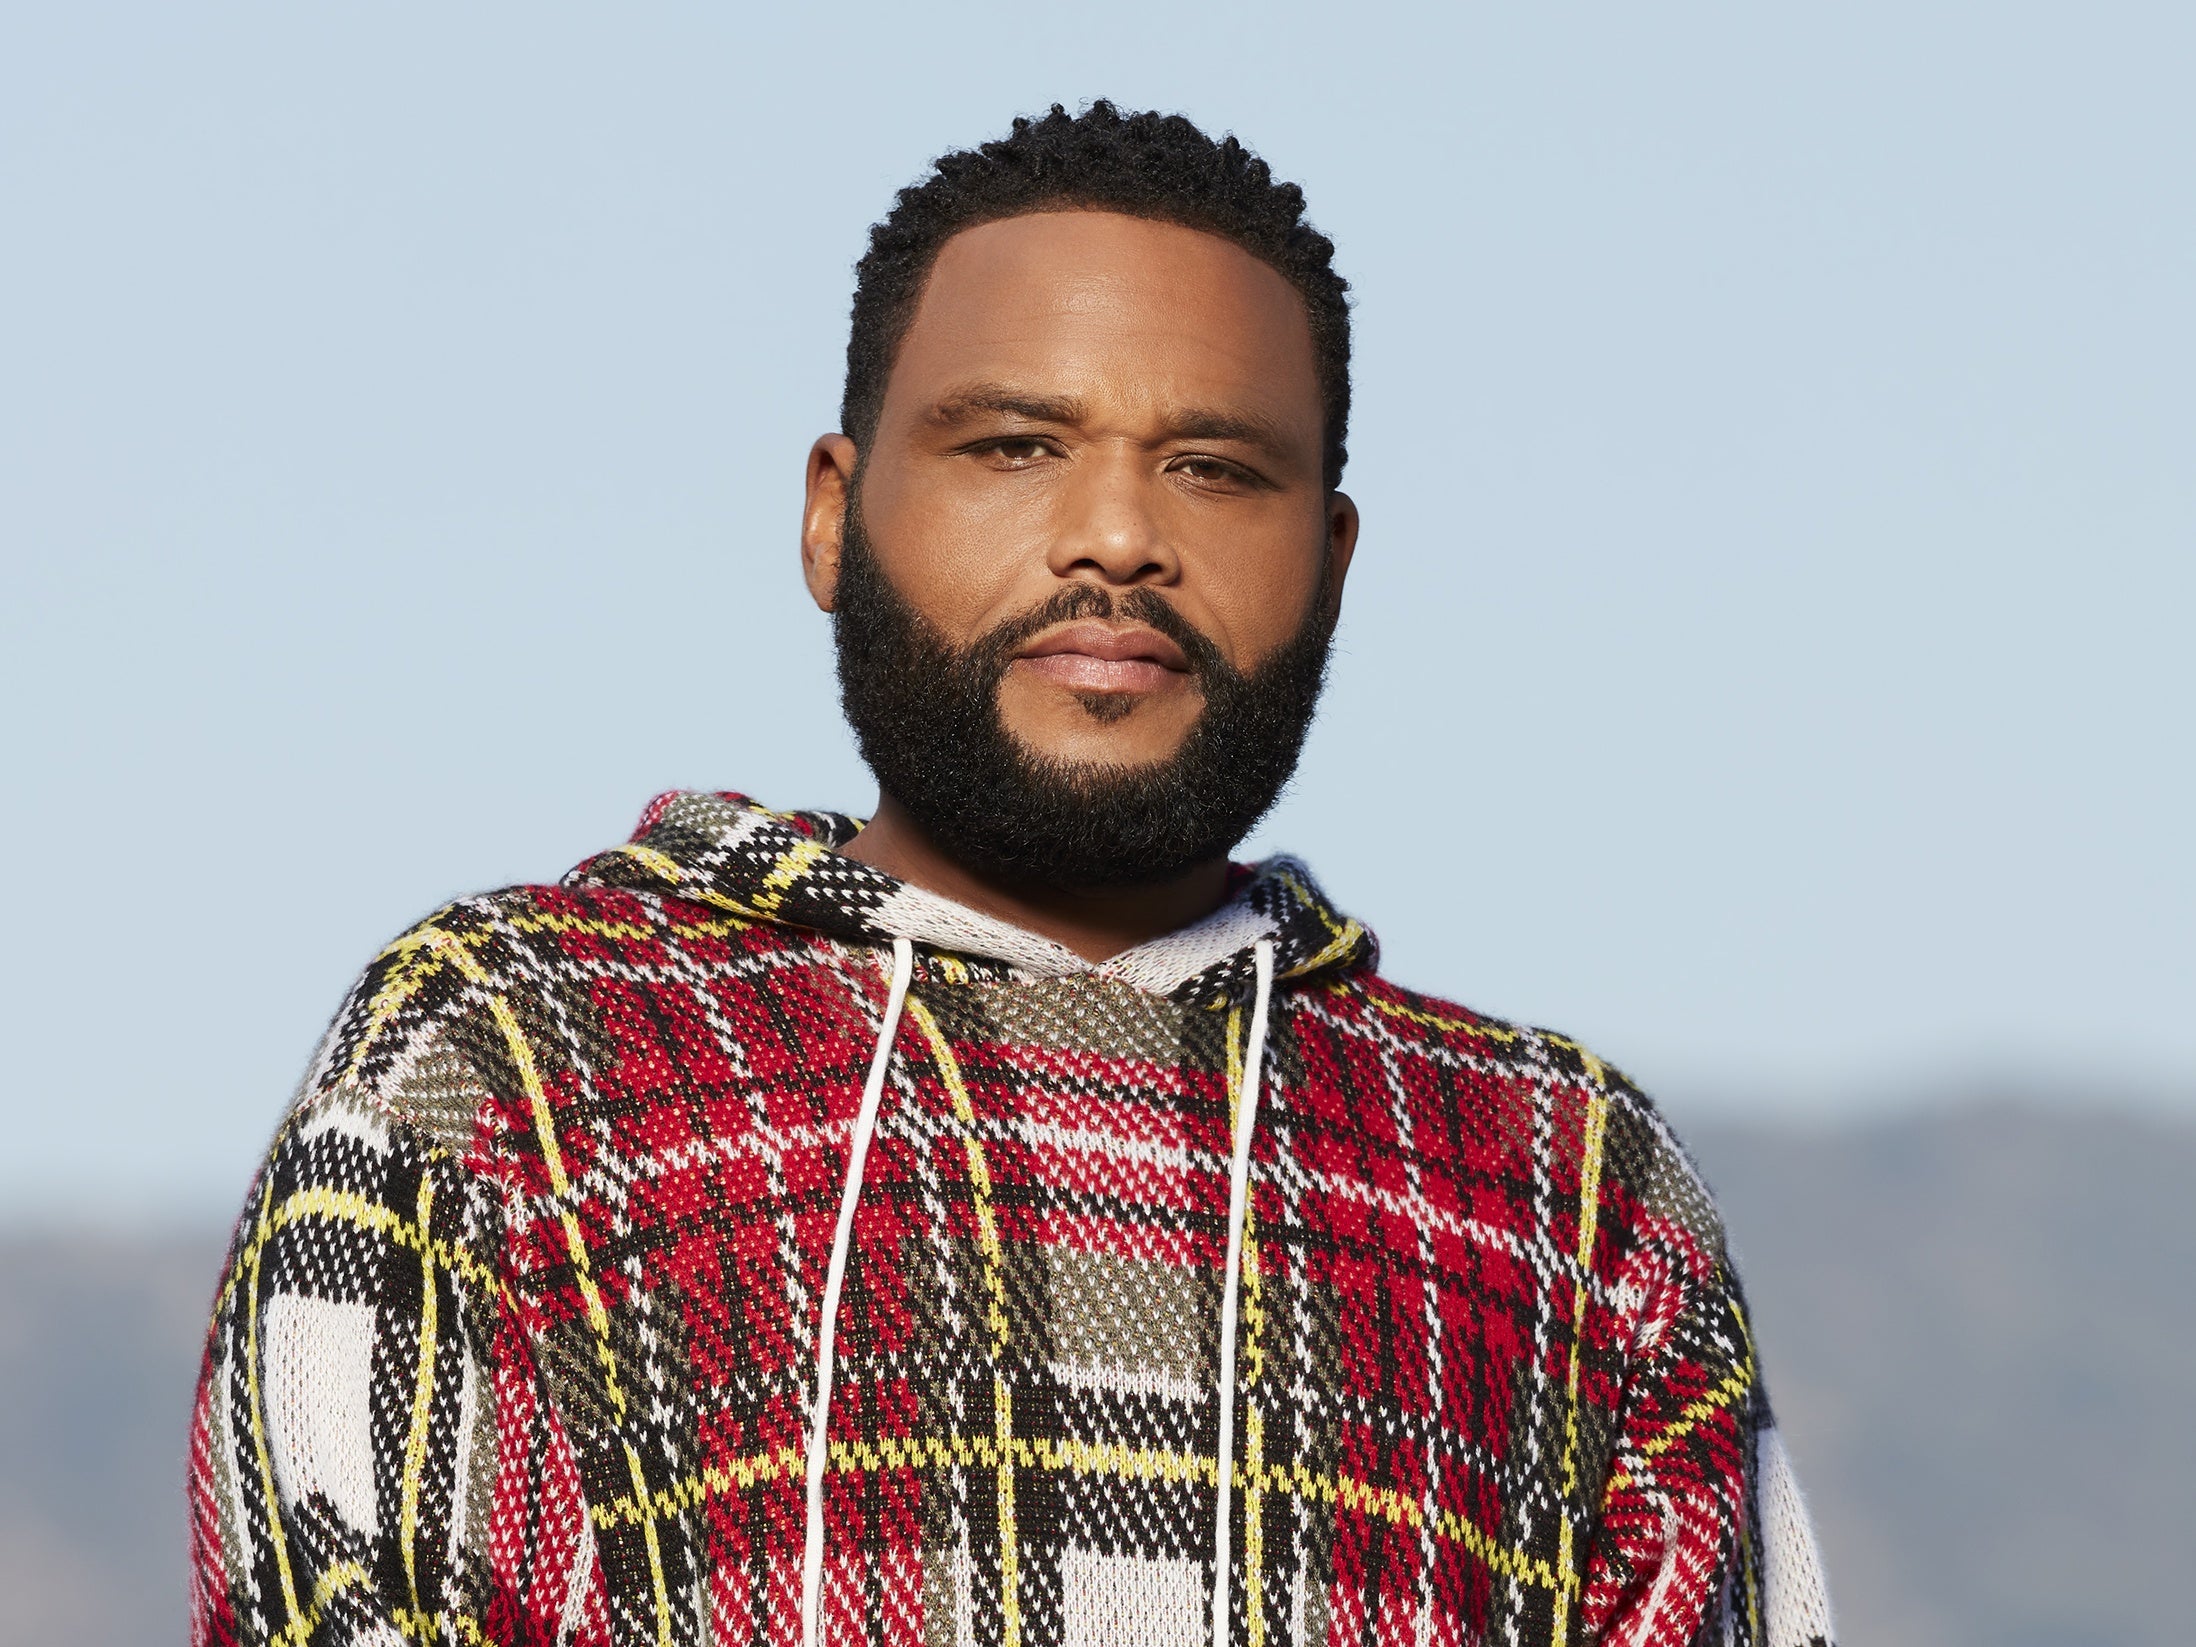 Anthony Anderson, Jamie Foxx, Yvette Nicole Brown And More Celebrate Disney Dreamers 2020 Class